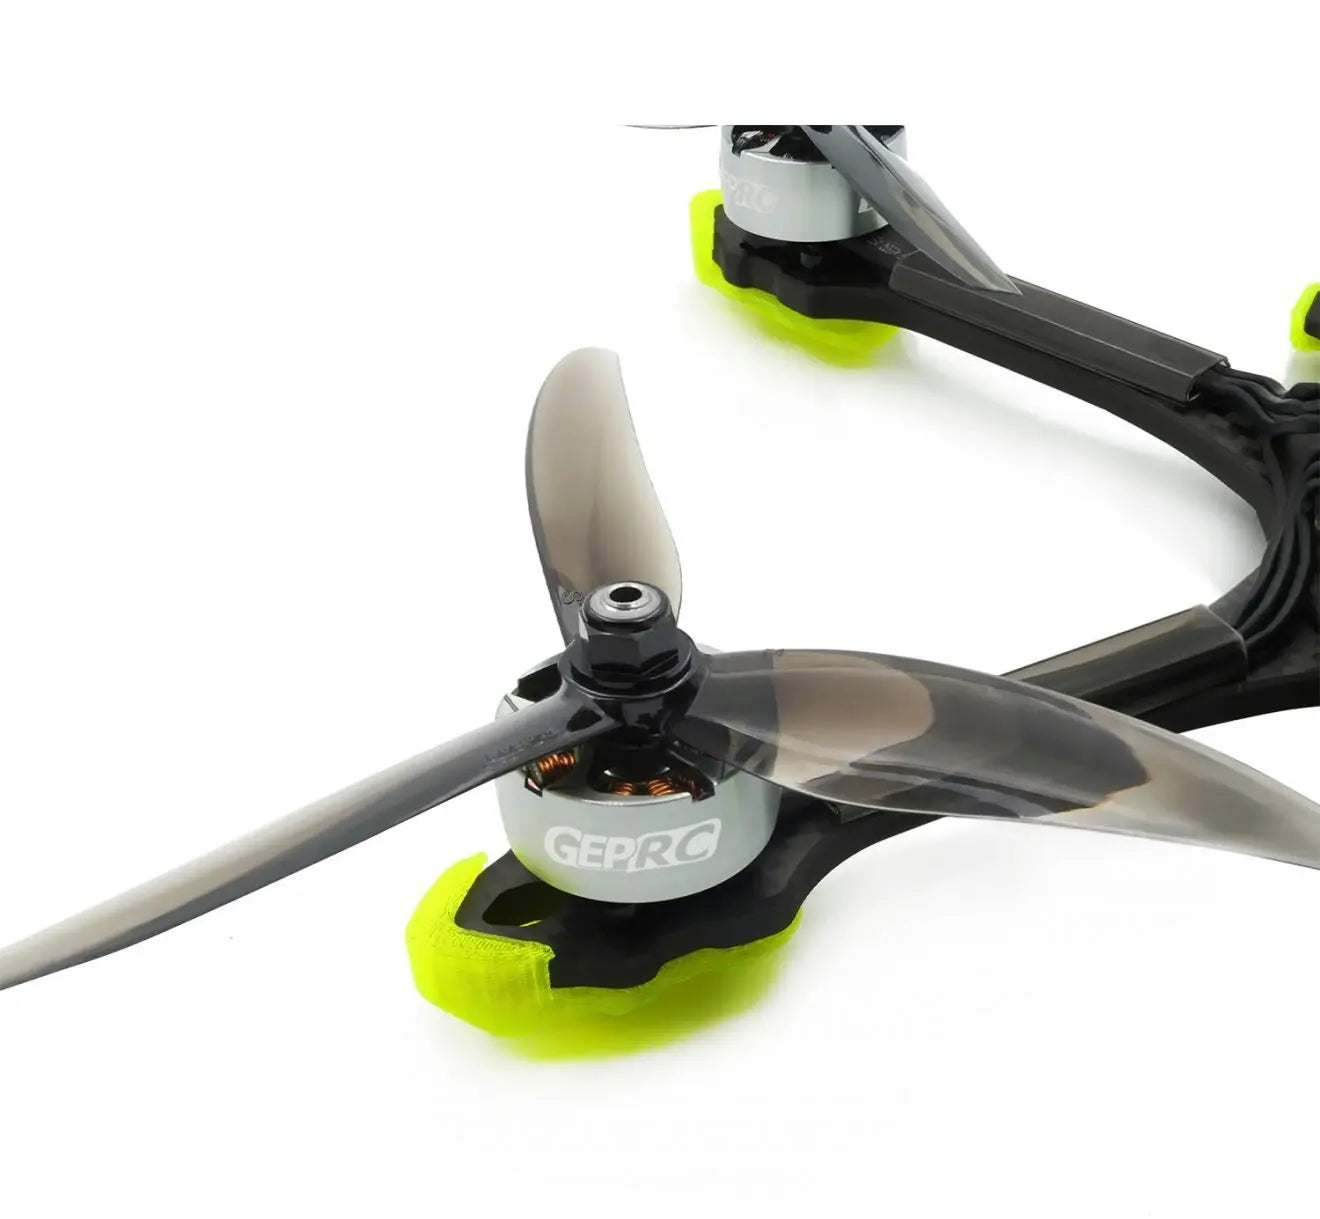 MARK5 HD AVATAR Freestyle FPV Drone, Specially designed independent capacitor and buzzer compartment for better performance and shaking reduction